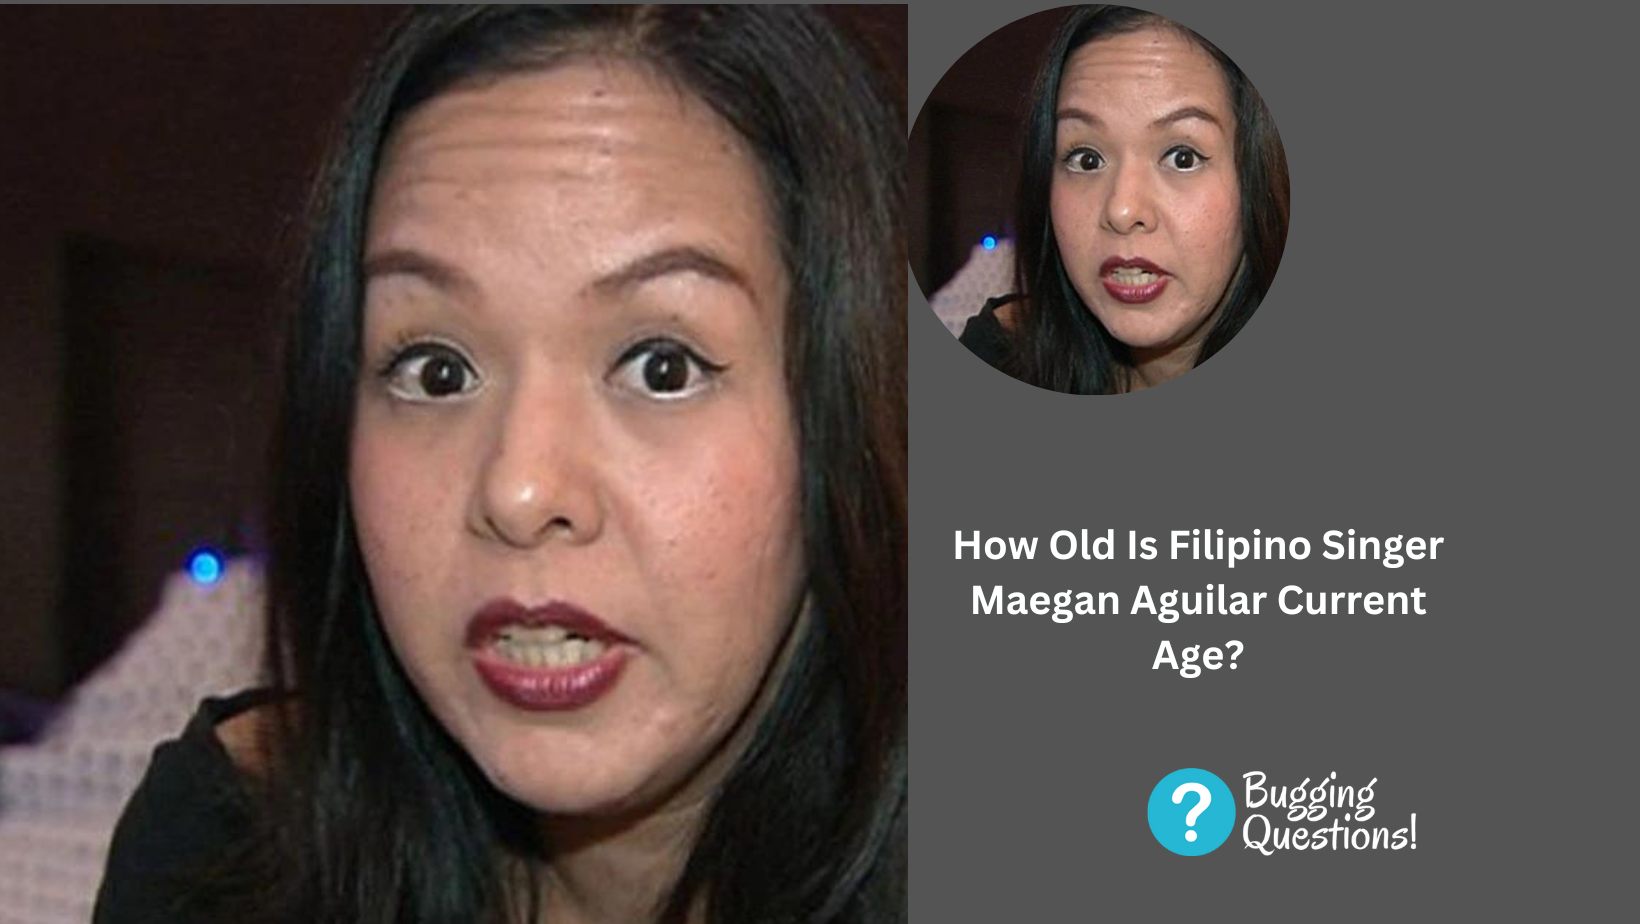 How Old Is Filipino Singer Maegan Aguilar Current Age?